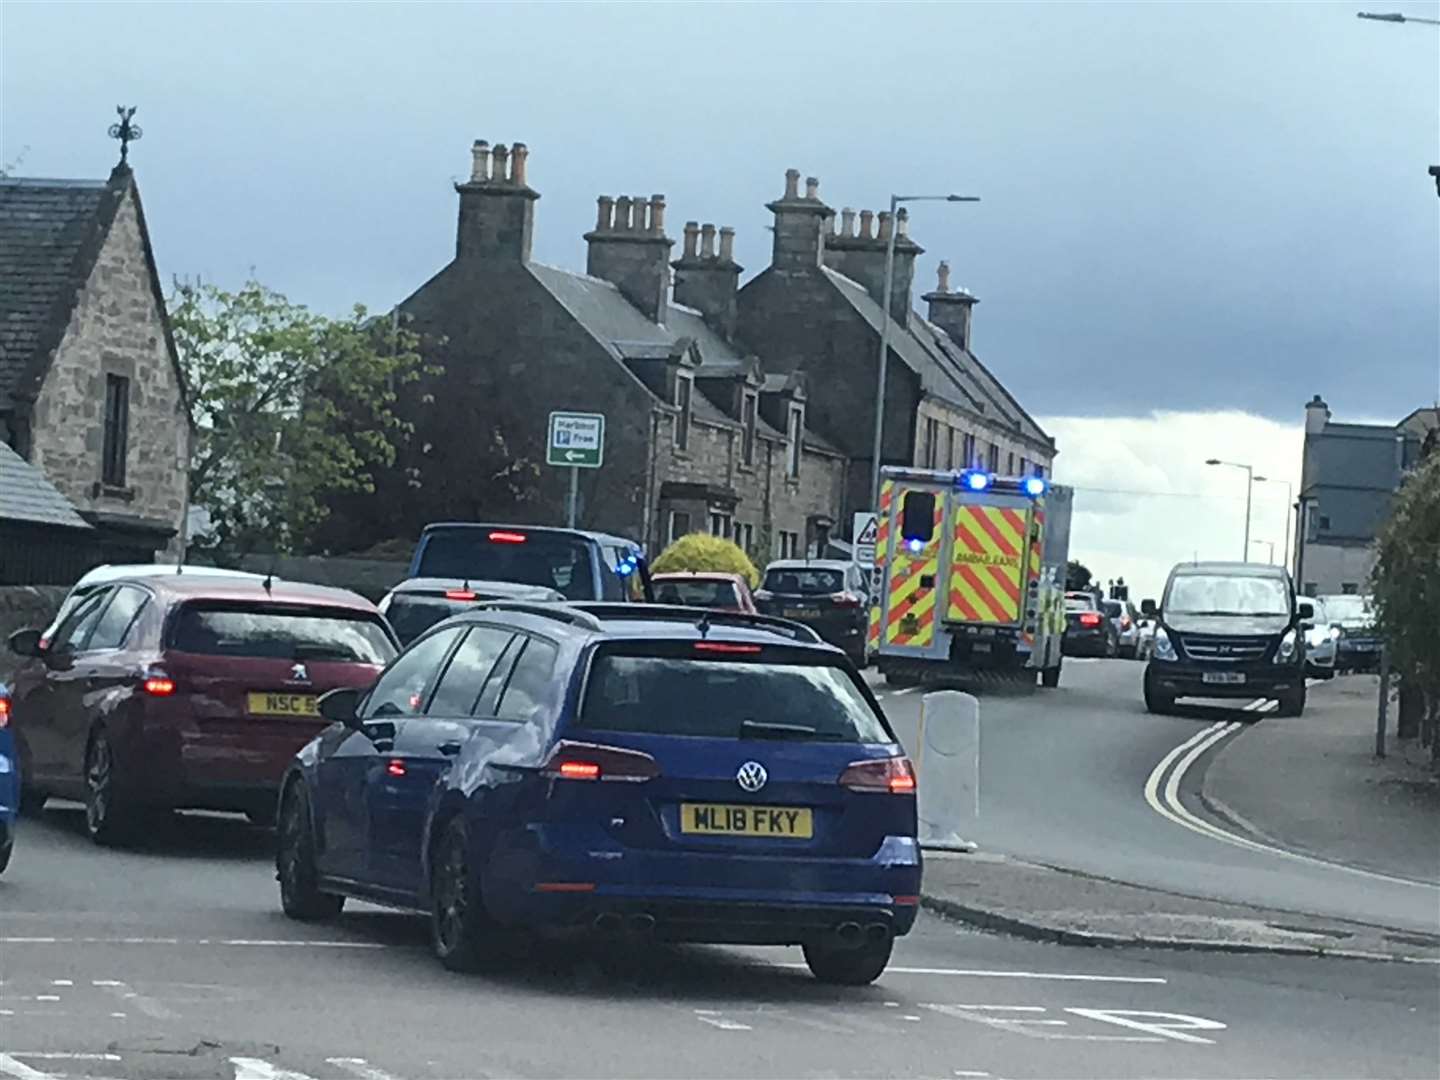 Nairn traffic at a standstill forces an ambulance into the right-hand lane as it attends to an emergency.